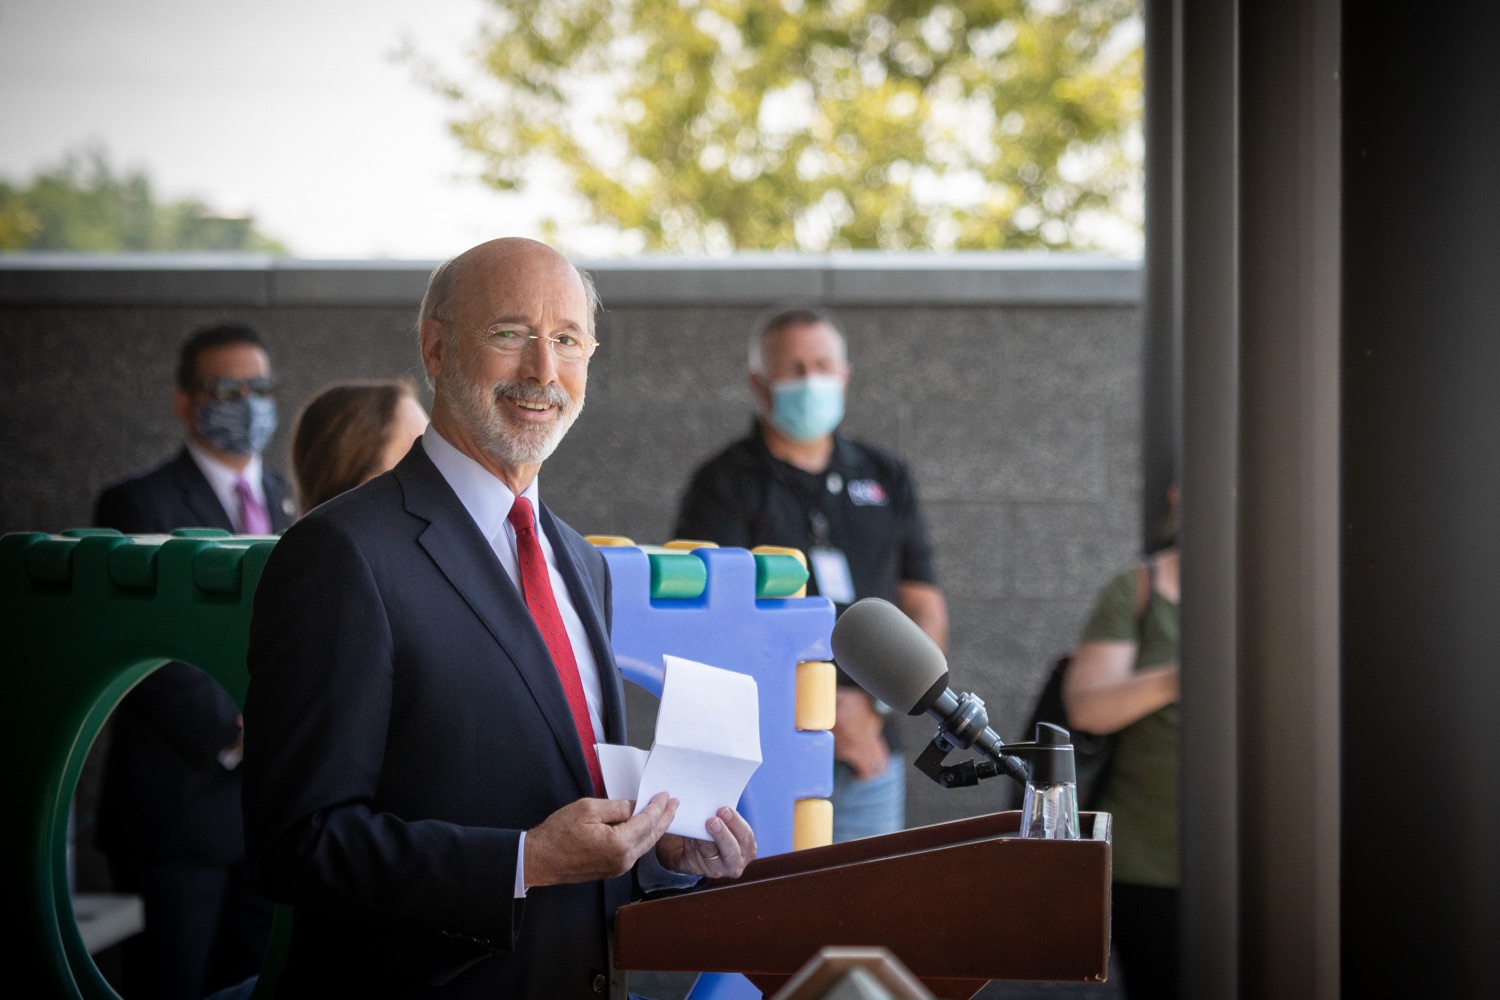 Pennsylvania Governor Tom Wolf speaking with the press.  Governor Tom Wolf visited the child care center at PSECU headquarters in Harrisburg today to announce $53 million in additional financial support for child care providers that have suffered during COVID-19.  Harrisburg, PA  July 6, 2020..<br><a href="https://filesource.amperwave.net/commonwealthofpa/photo/18143_gov_cares_dz_11.jpg" target="_blank">⇣ Download Photo</a>